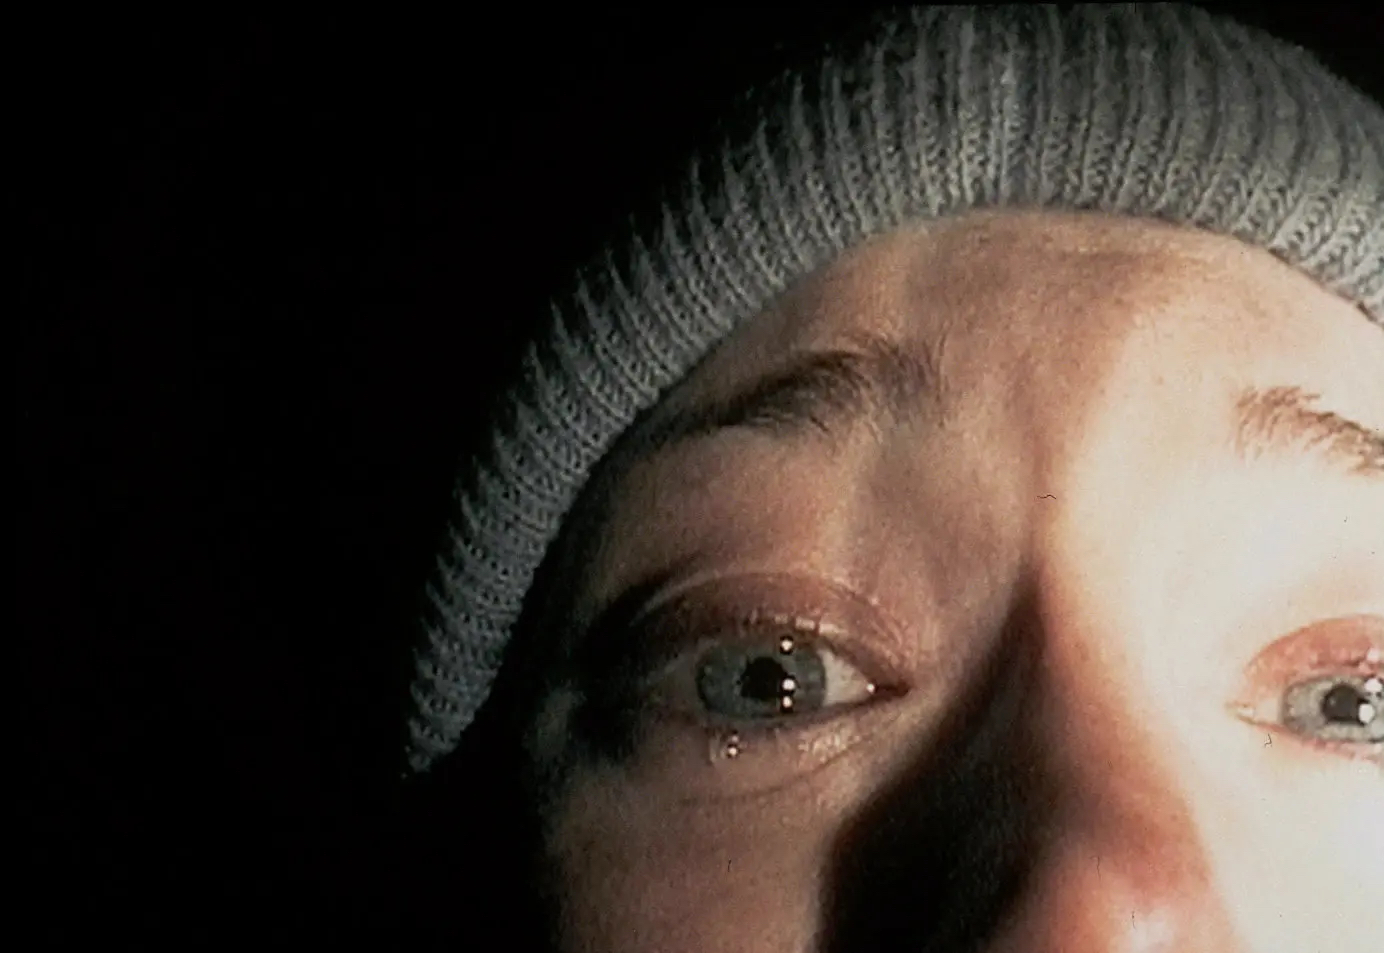 The Blair Witch Project (1999) still